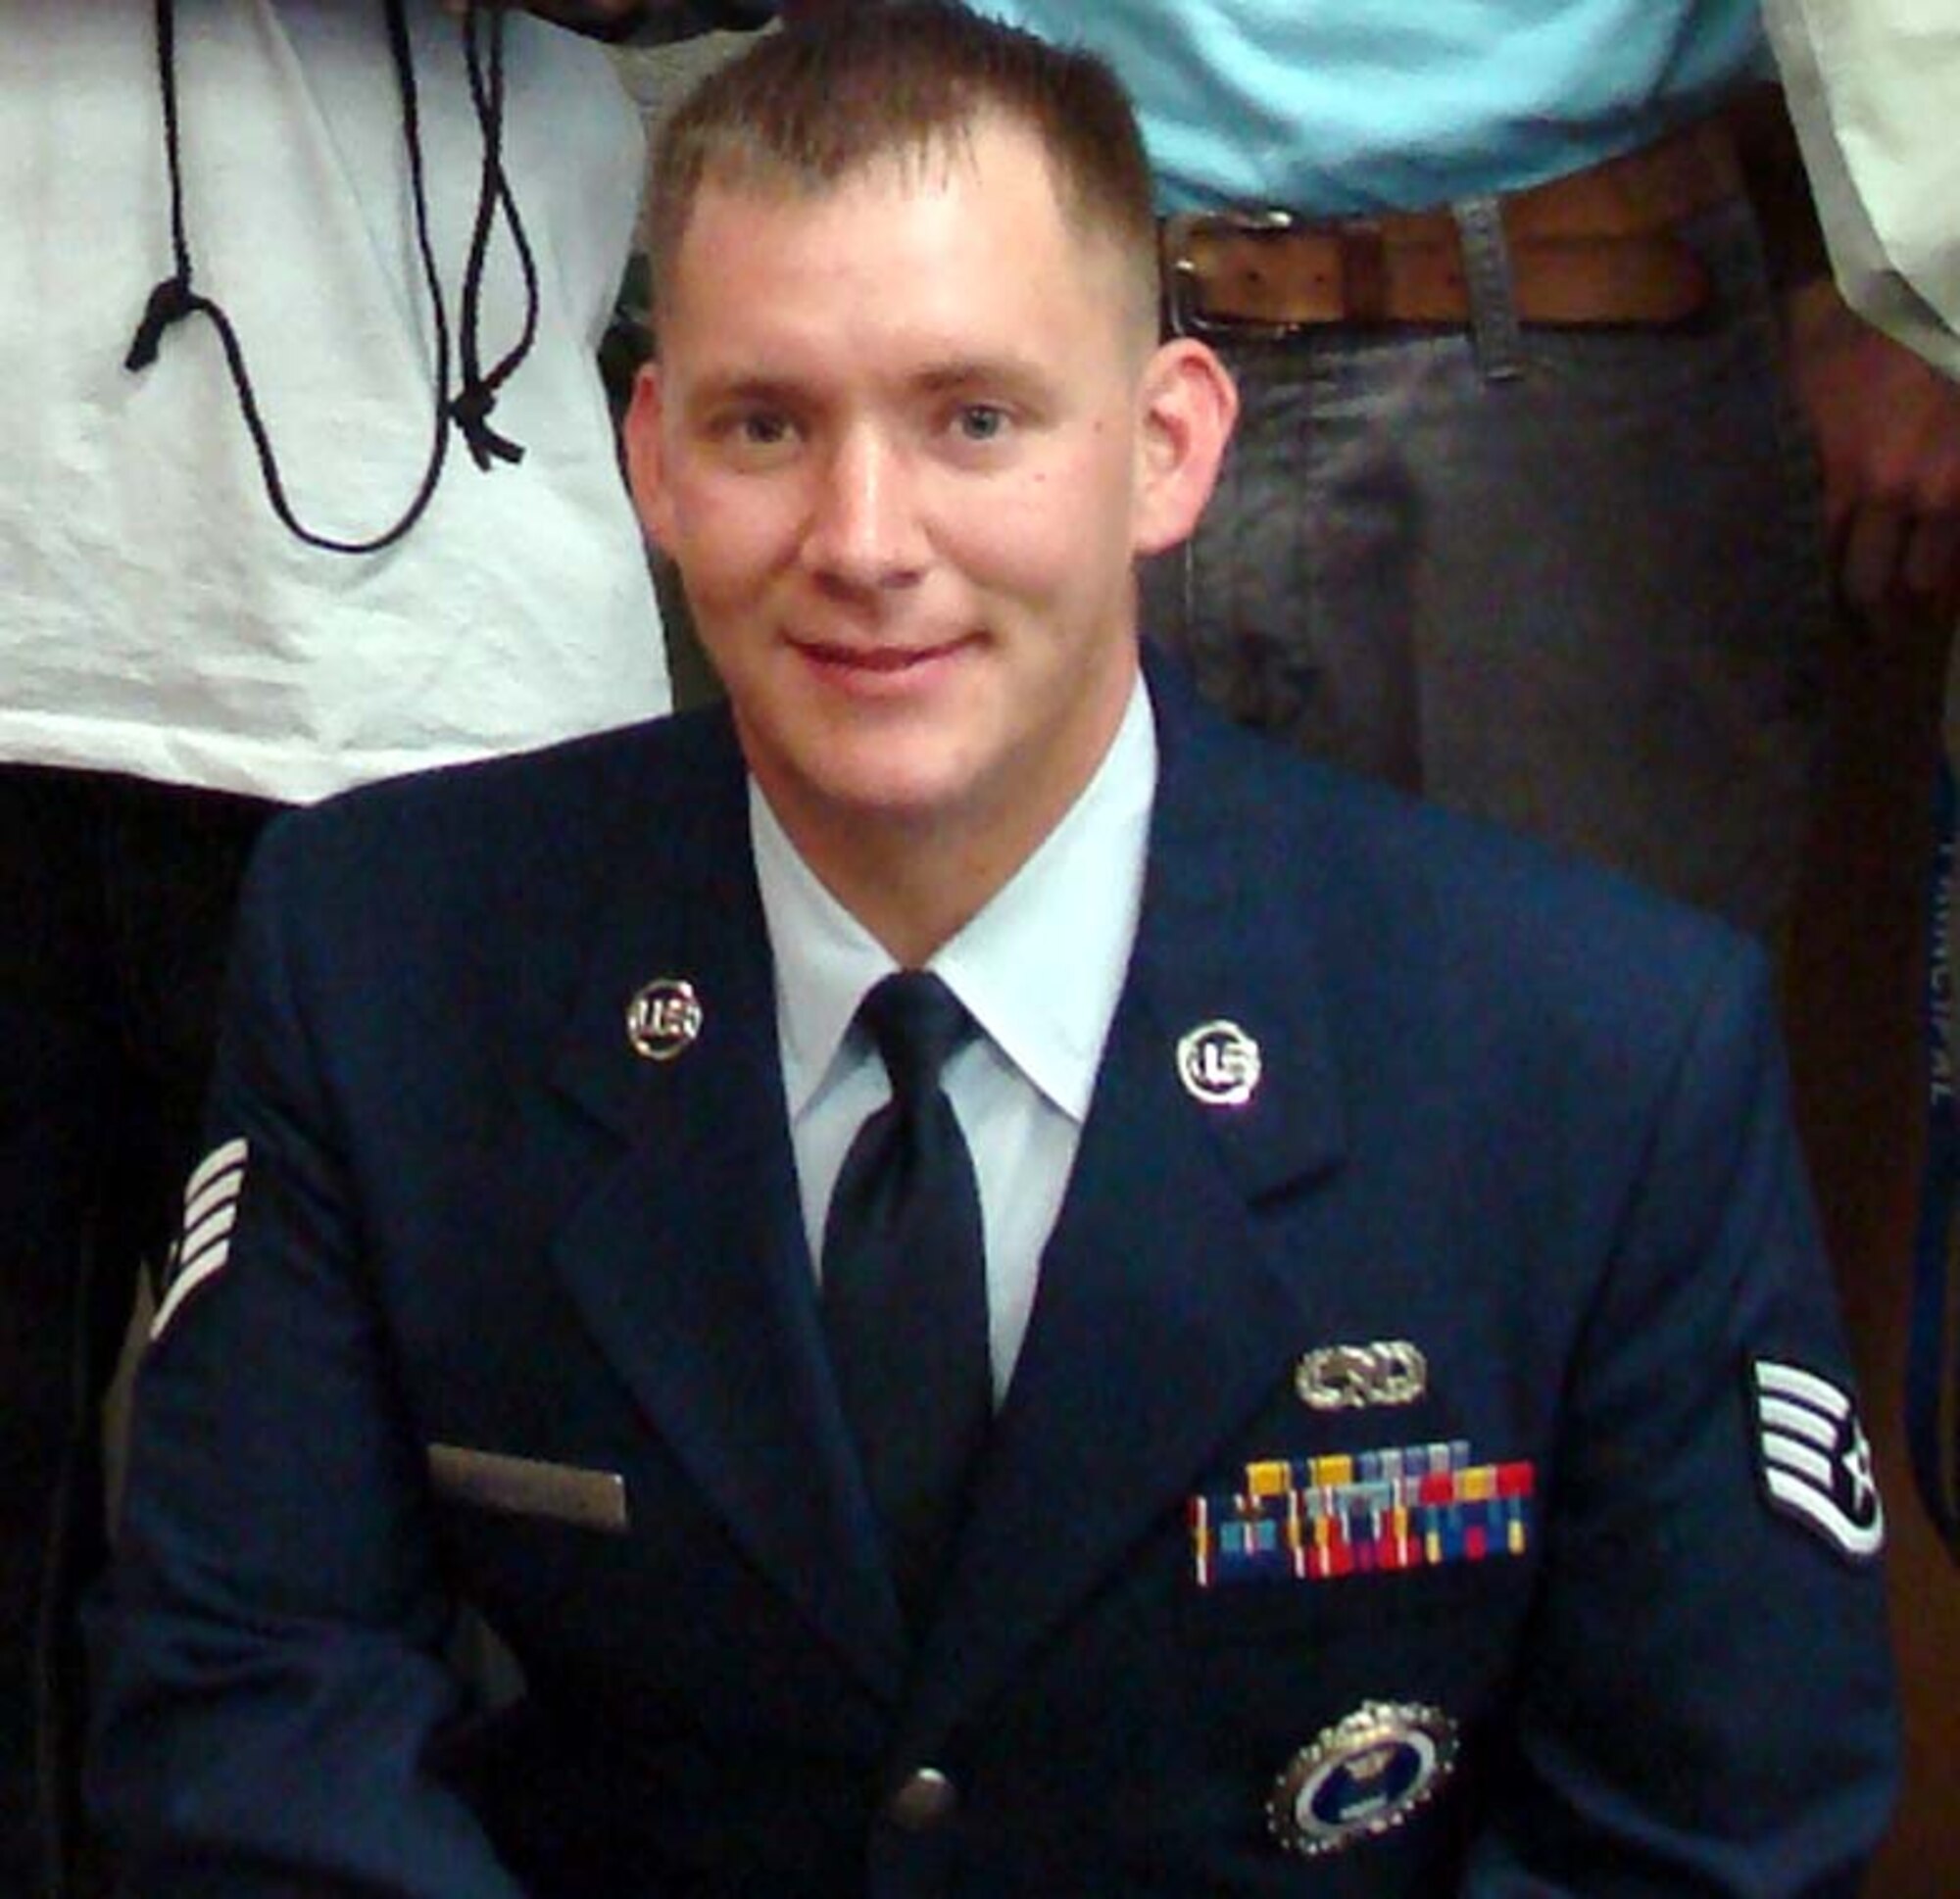 Recruiter donates marrow to help save life > Air Force Recruiting